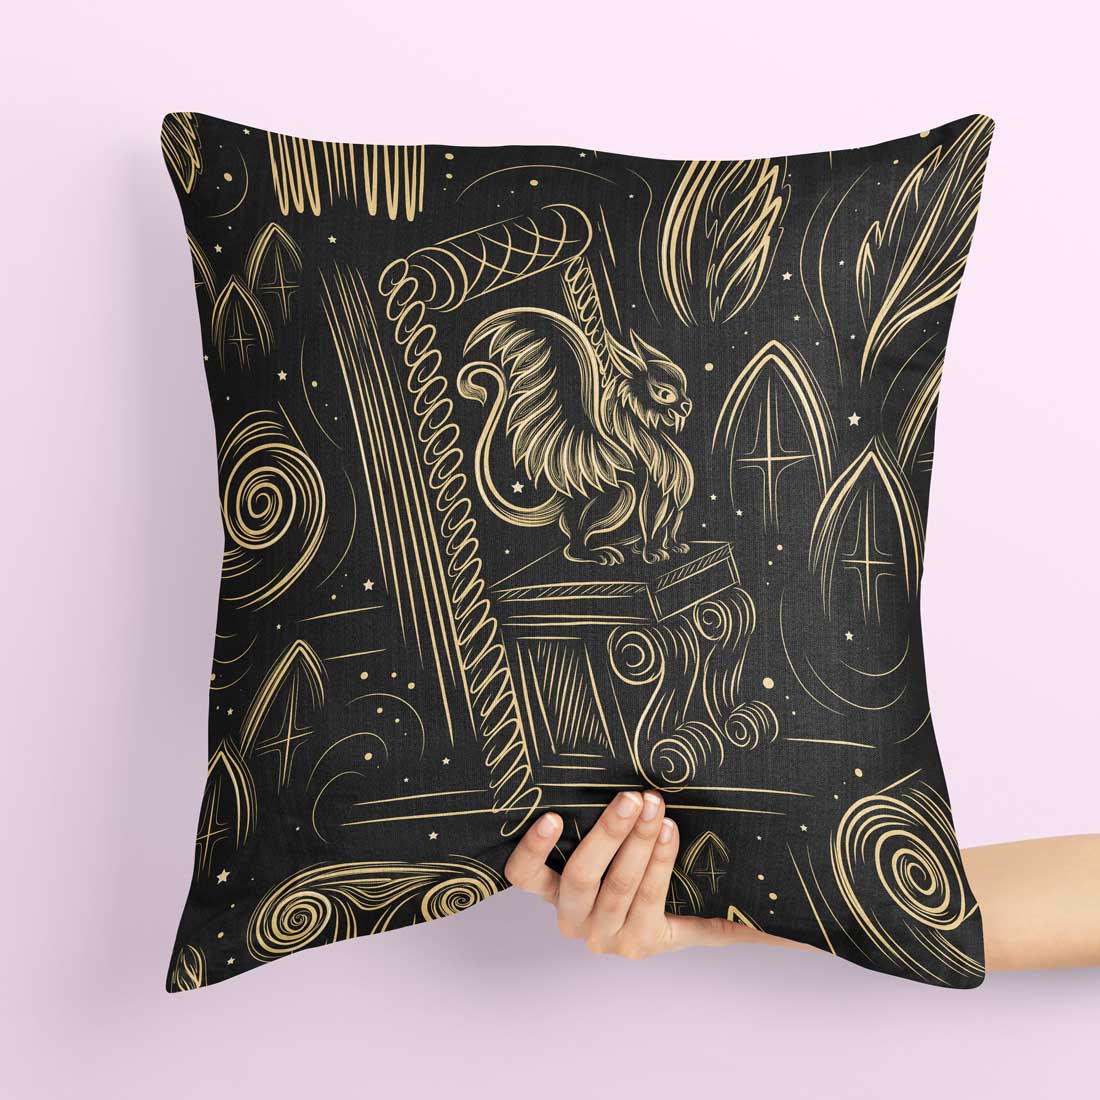 Image of a pillow with unique black and gold patterns.